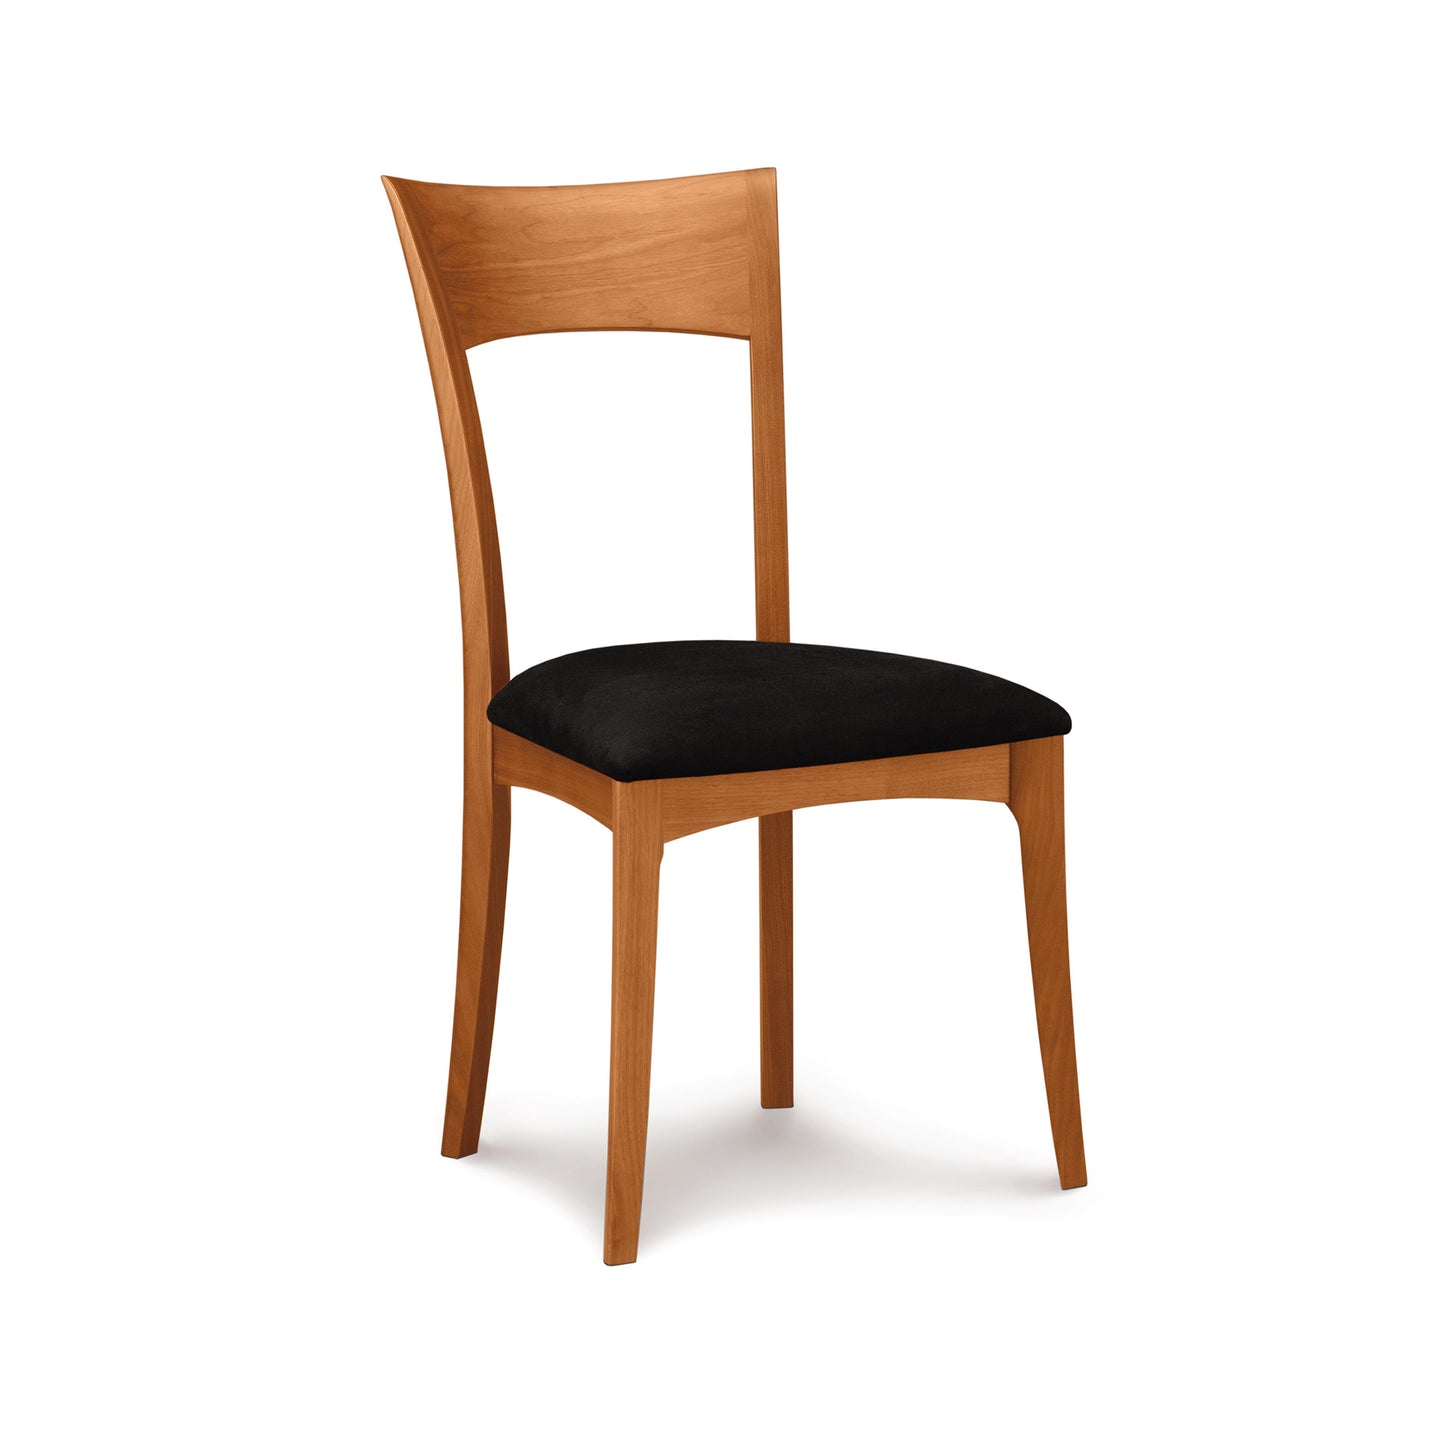 A modern solid Ingrid Chair from Copeland Furniture with a black upholstered seat against a white background.